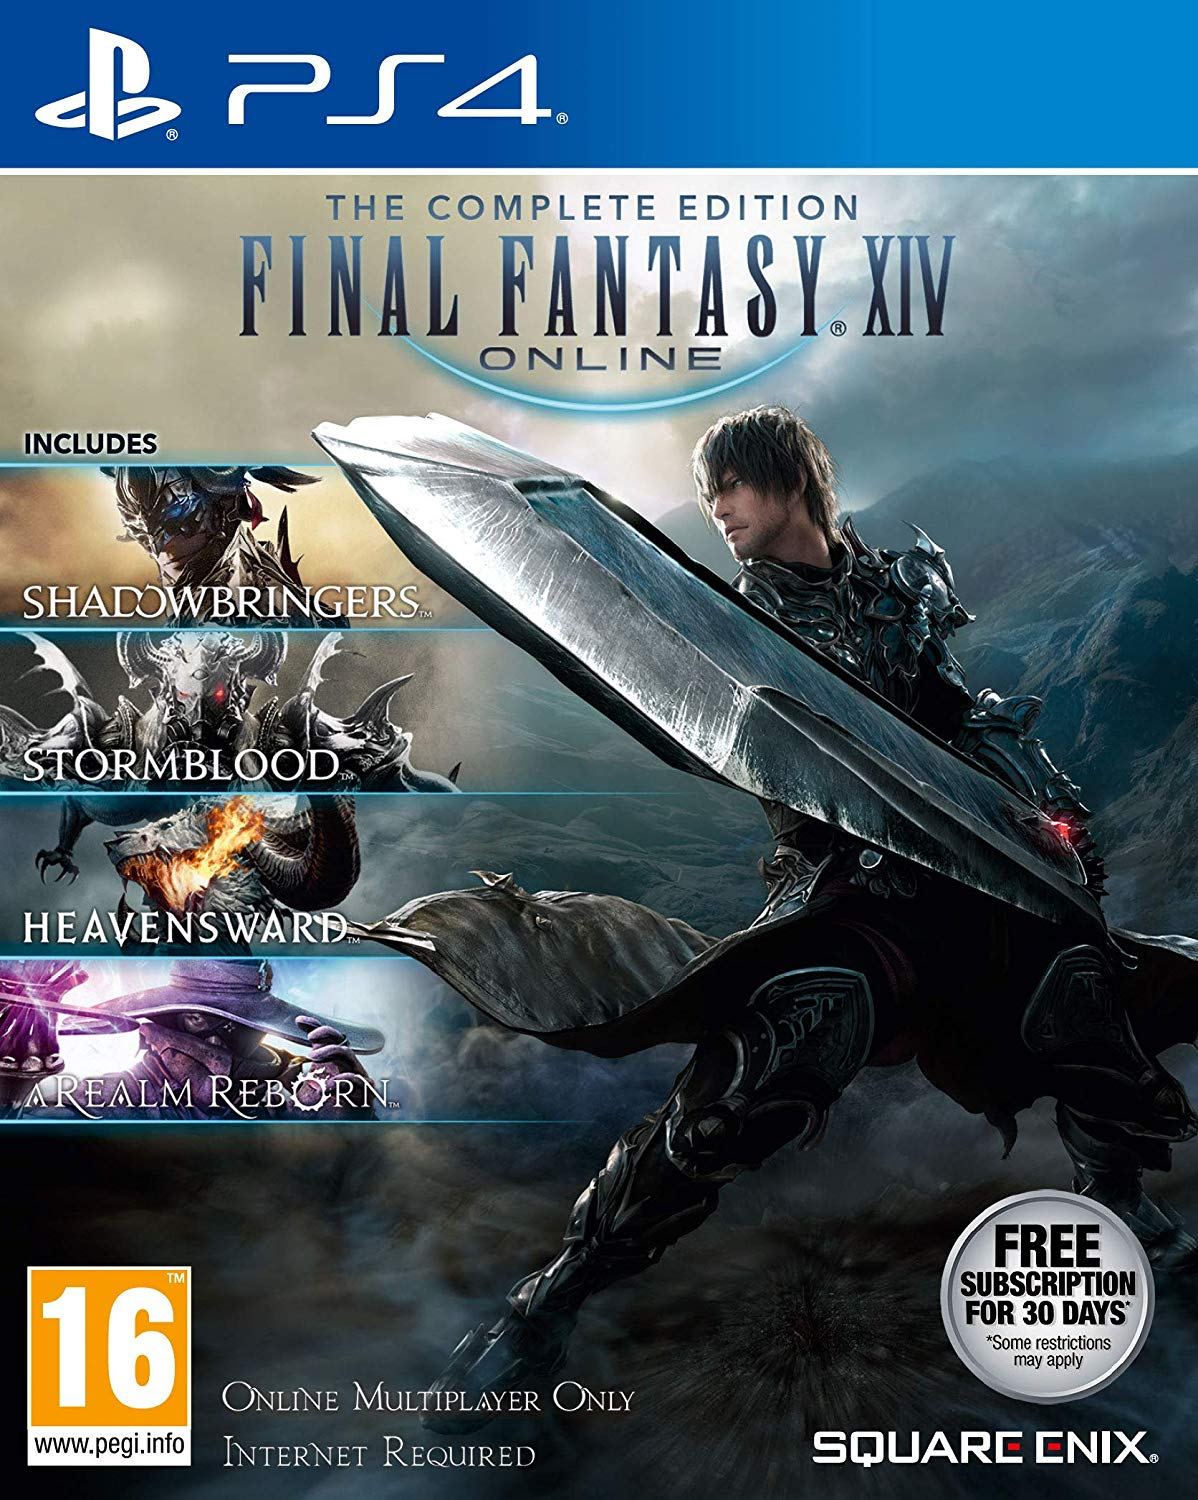 Final Fantasy XIV Online: The Complete Edition for PlayStation 4